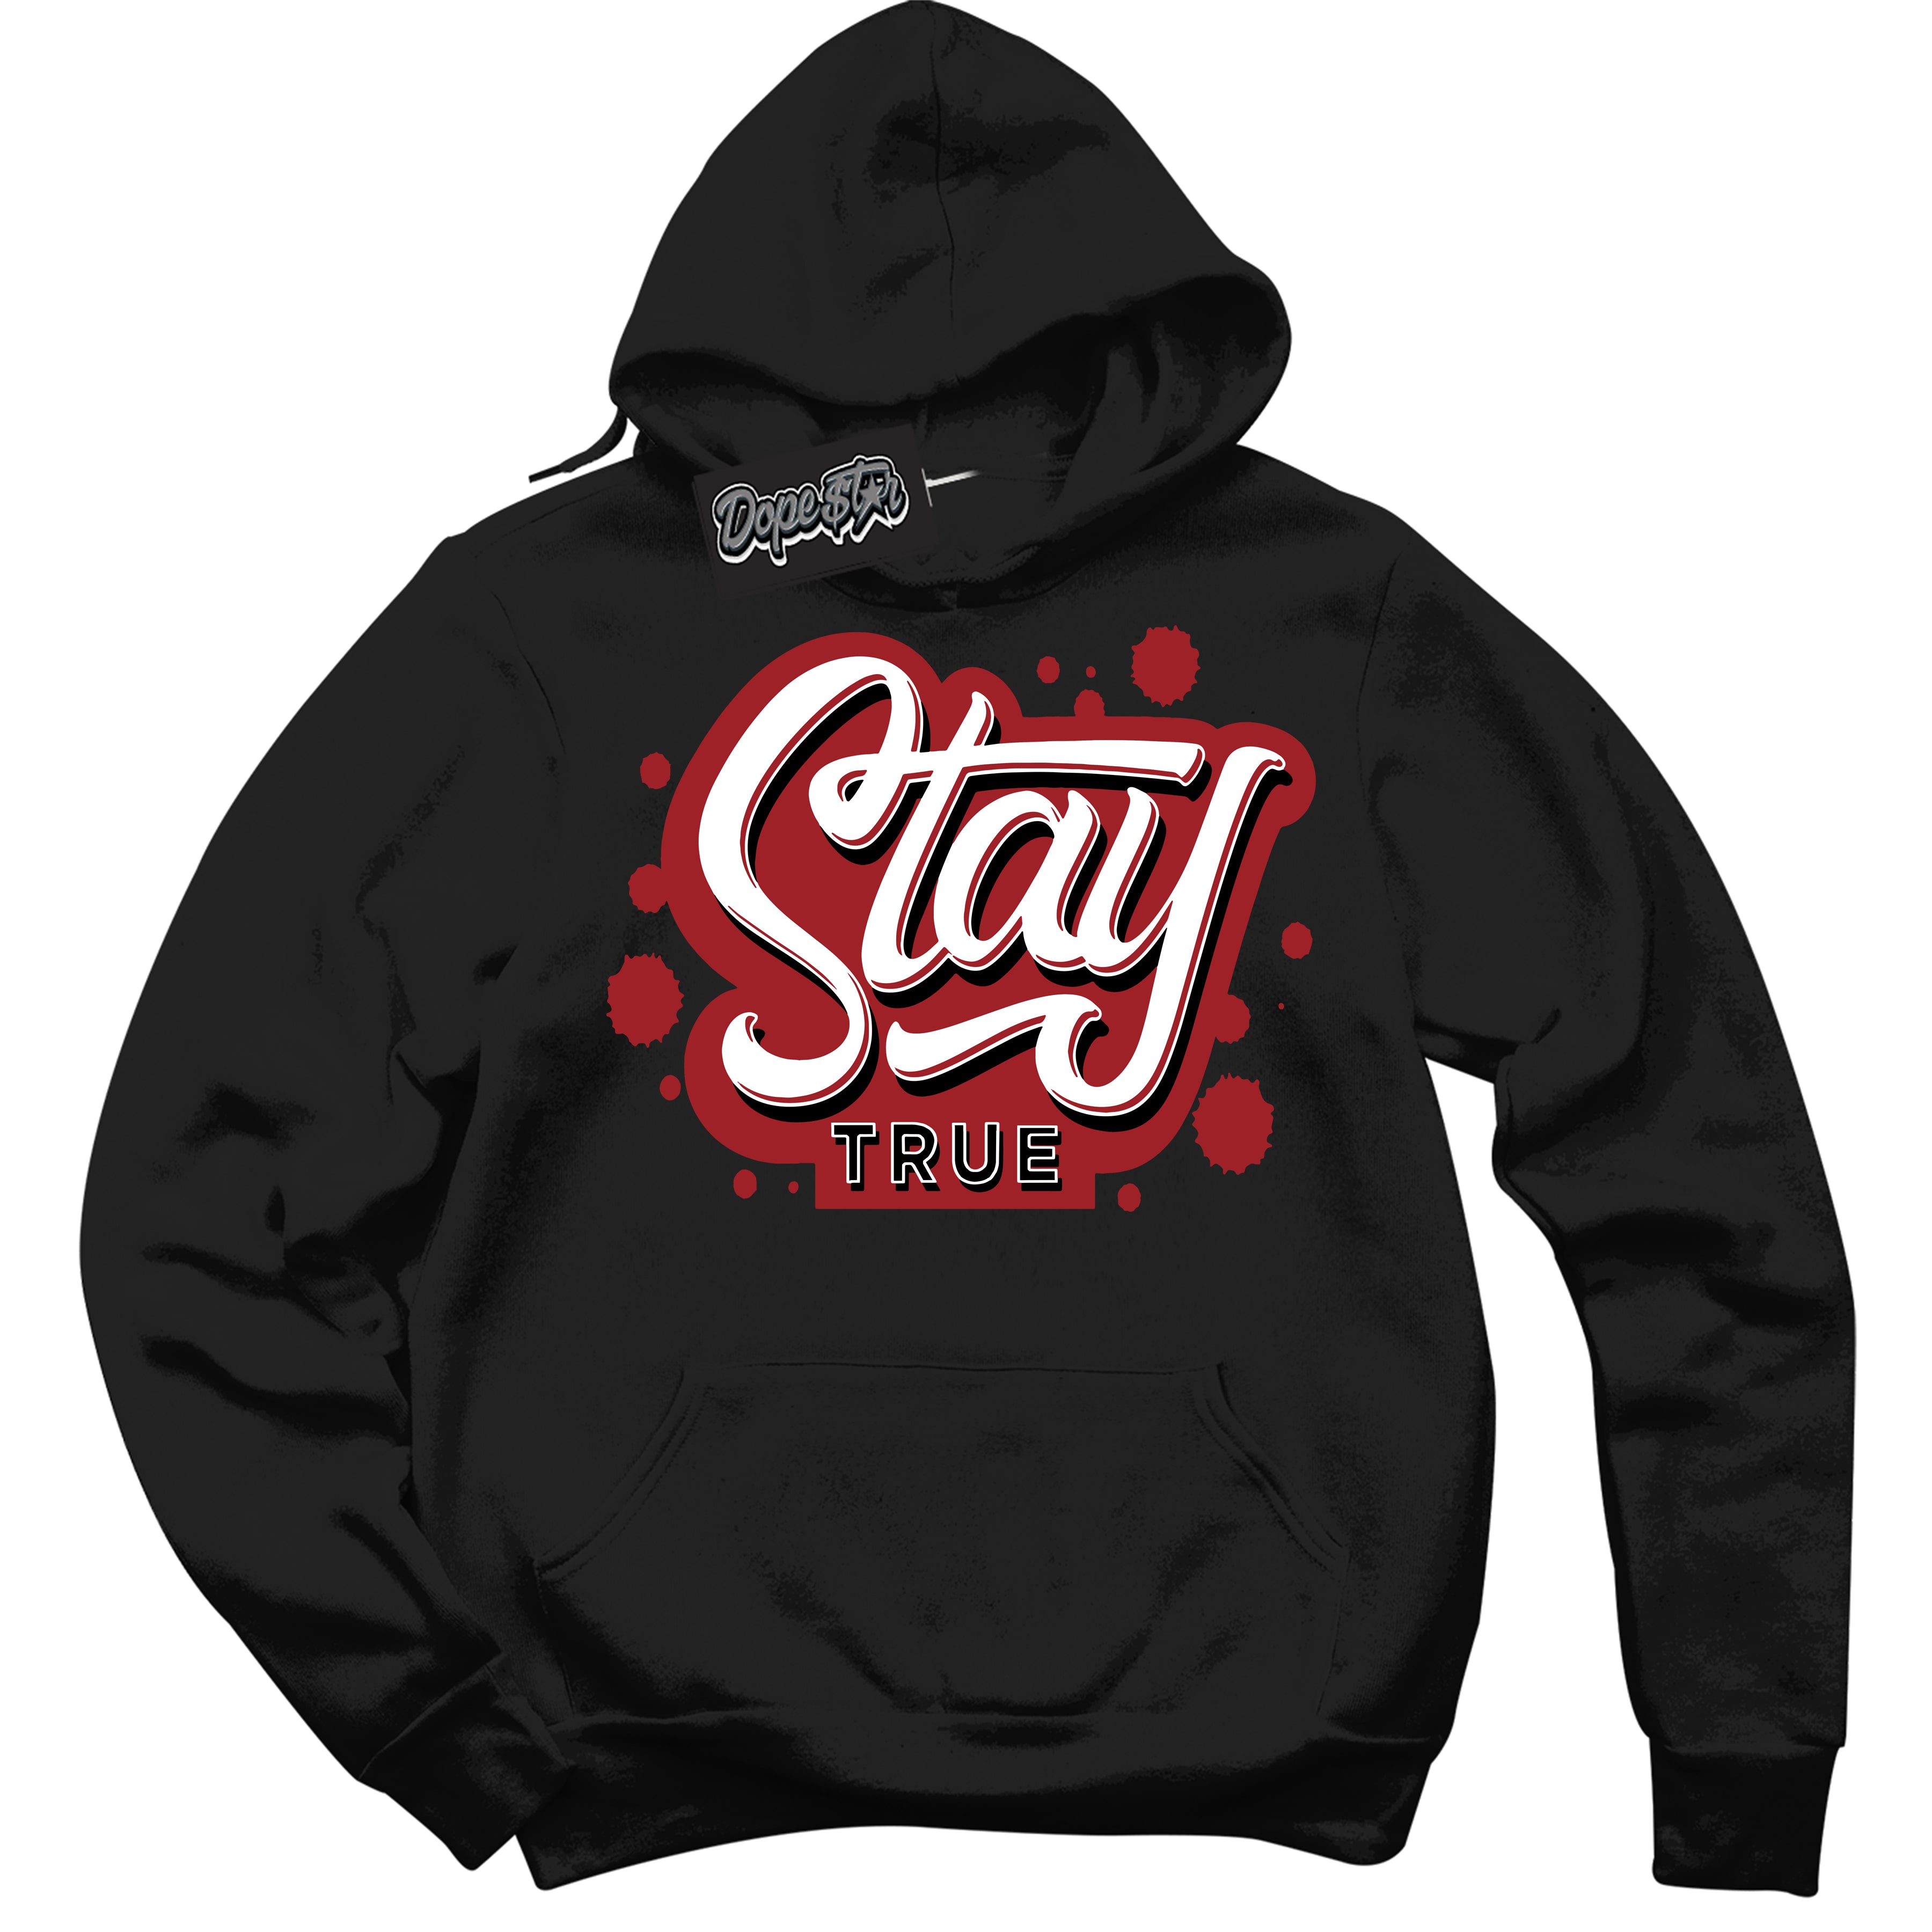 Cool Black Hoodie With “ Stay True “ Design That Perfectly Matches Lost And Found 1s Sneakers